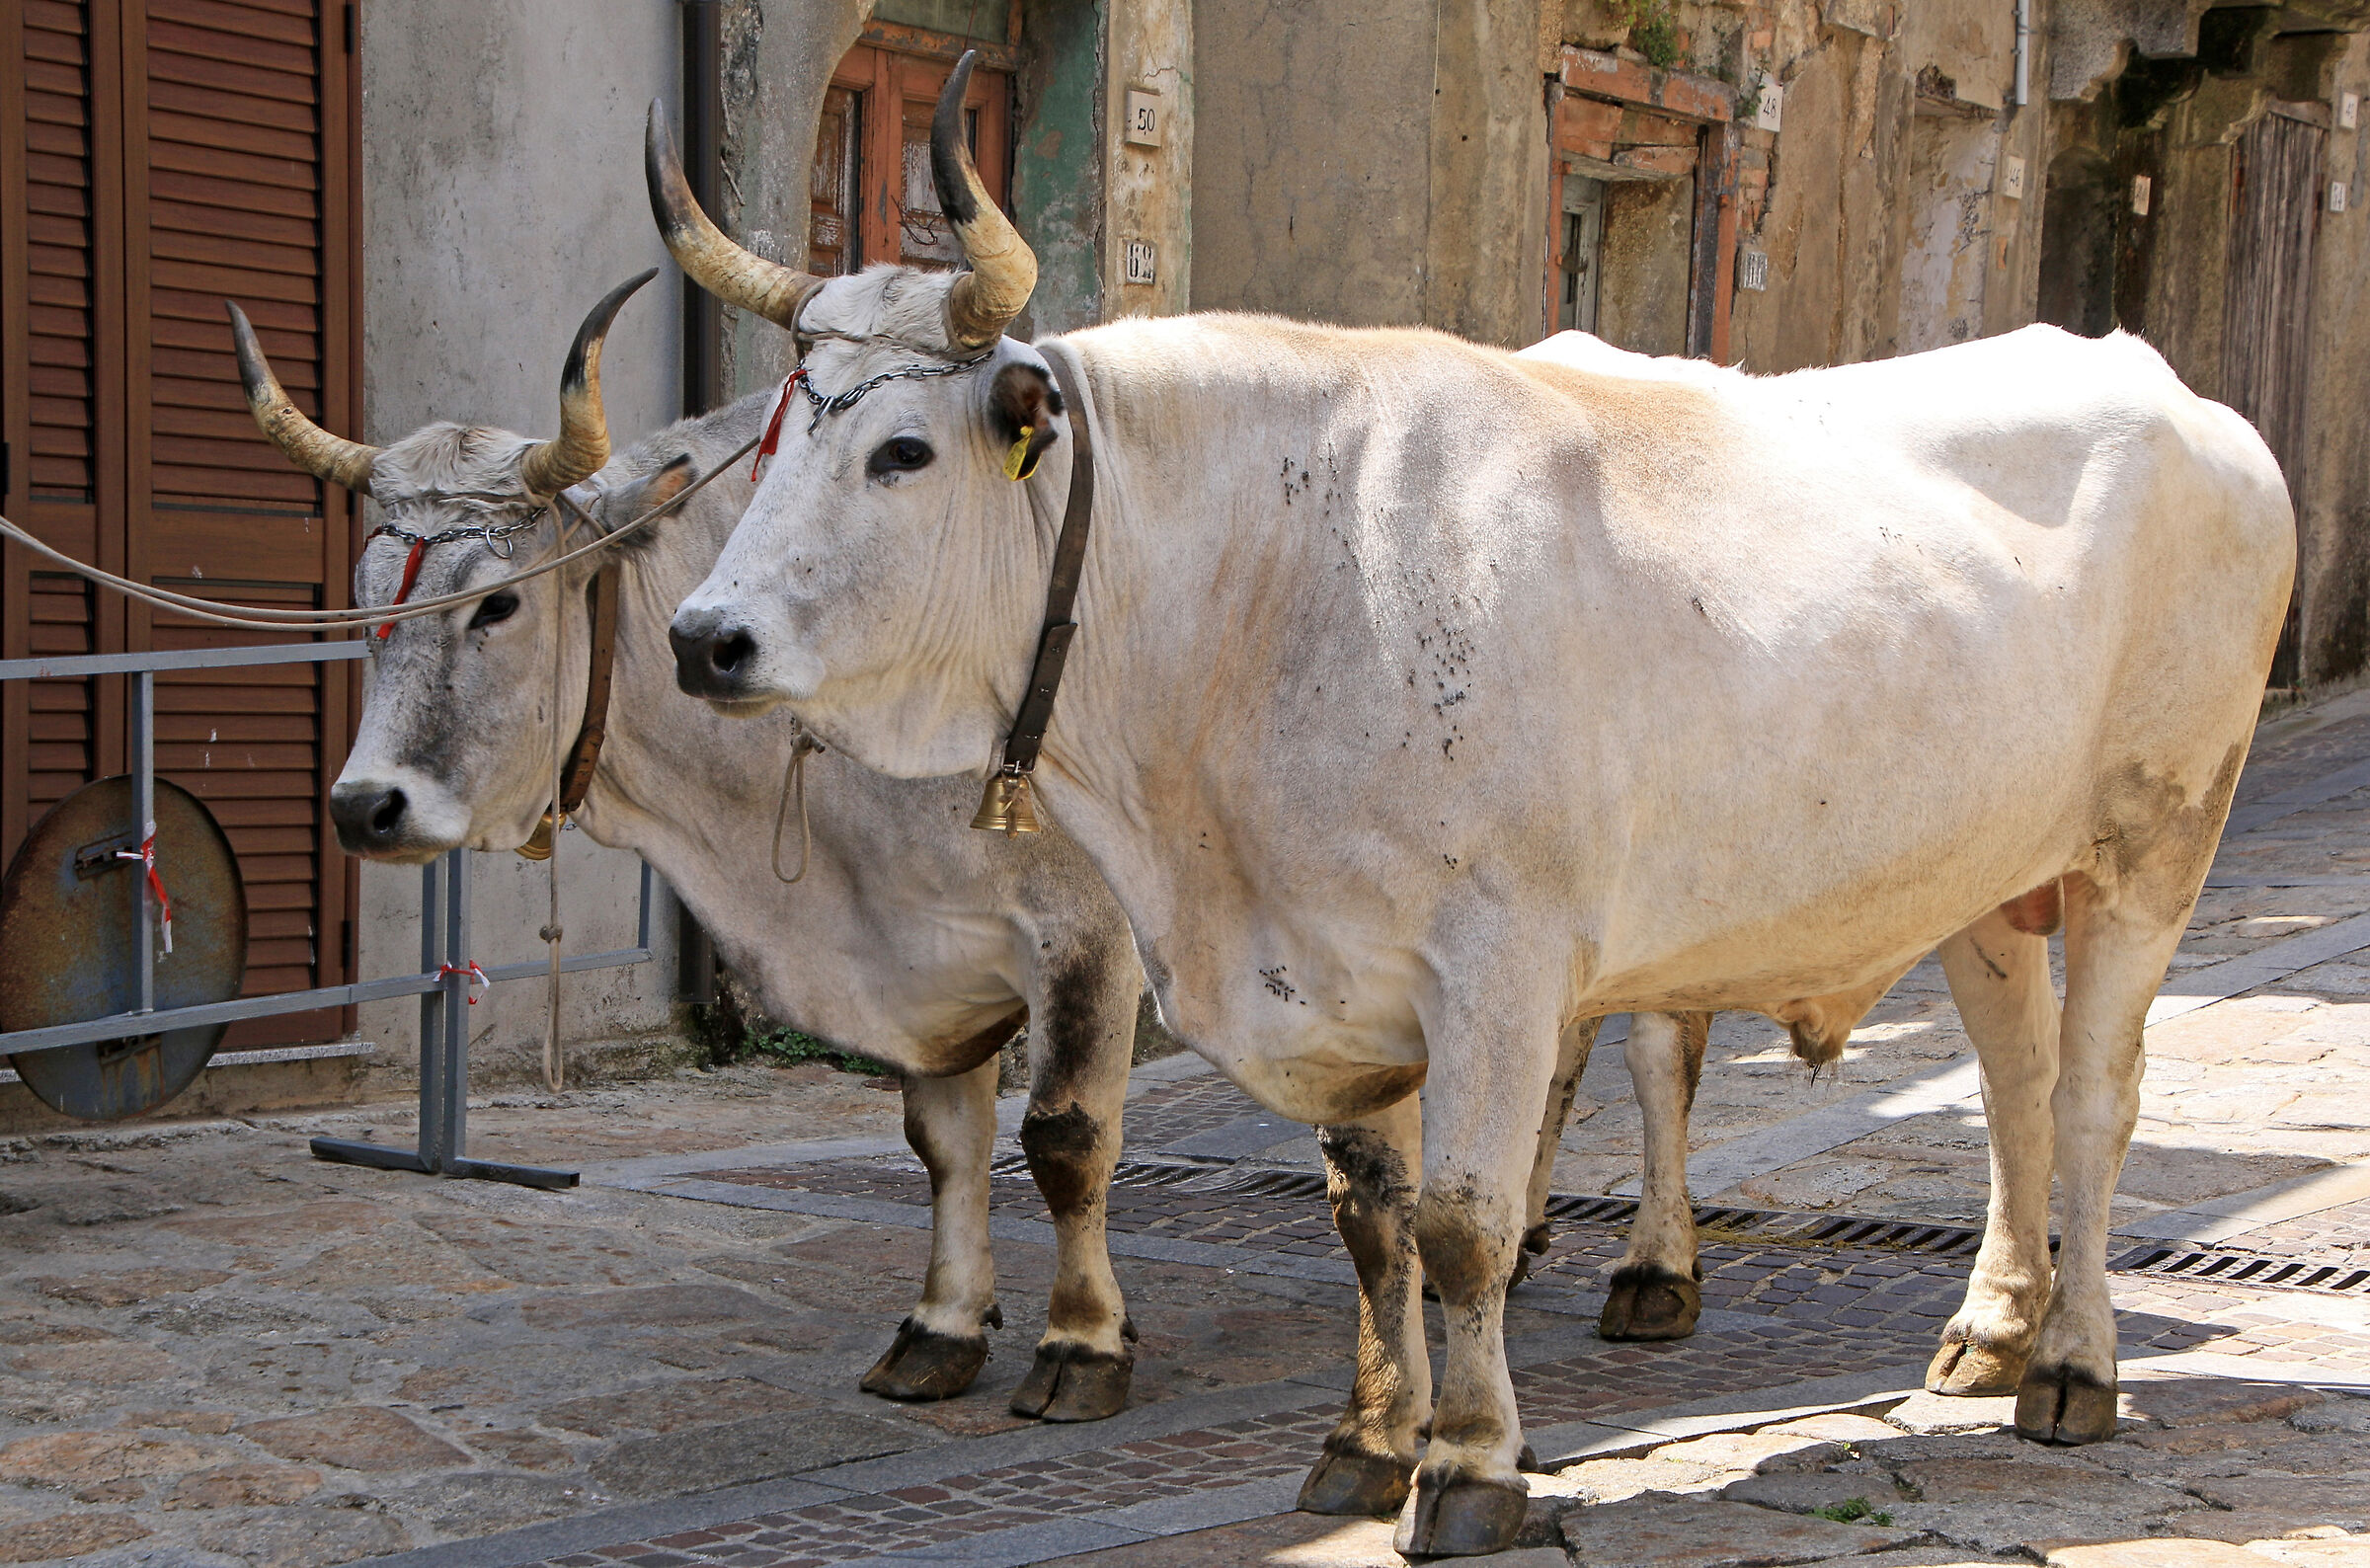 Calabria: Oxen "parked" in the centre of the country...